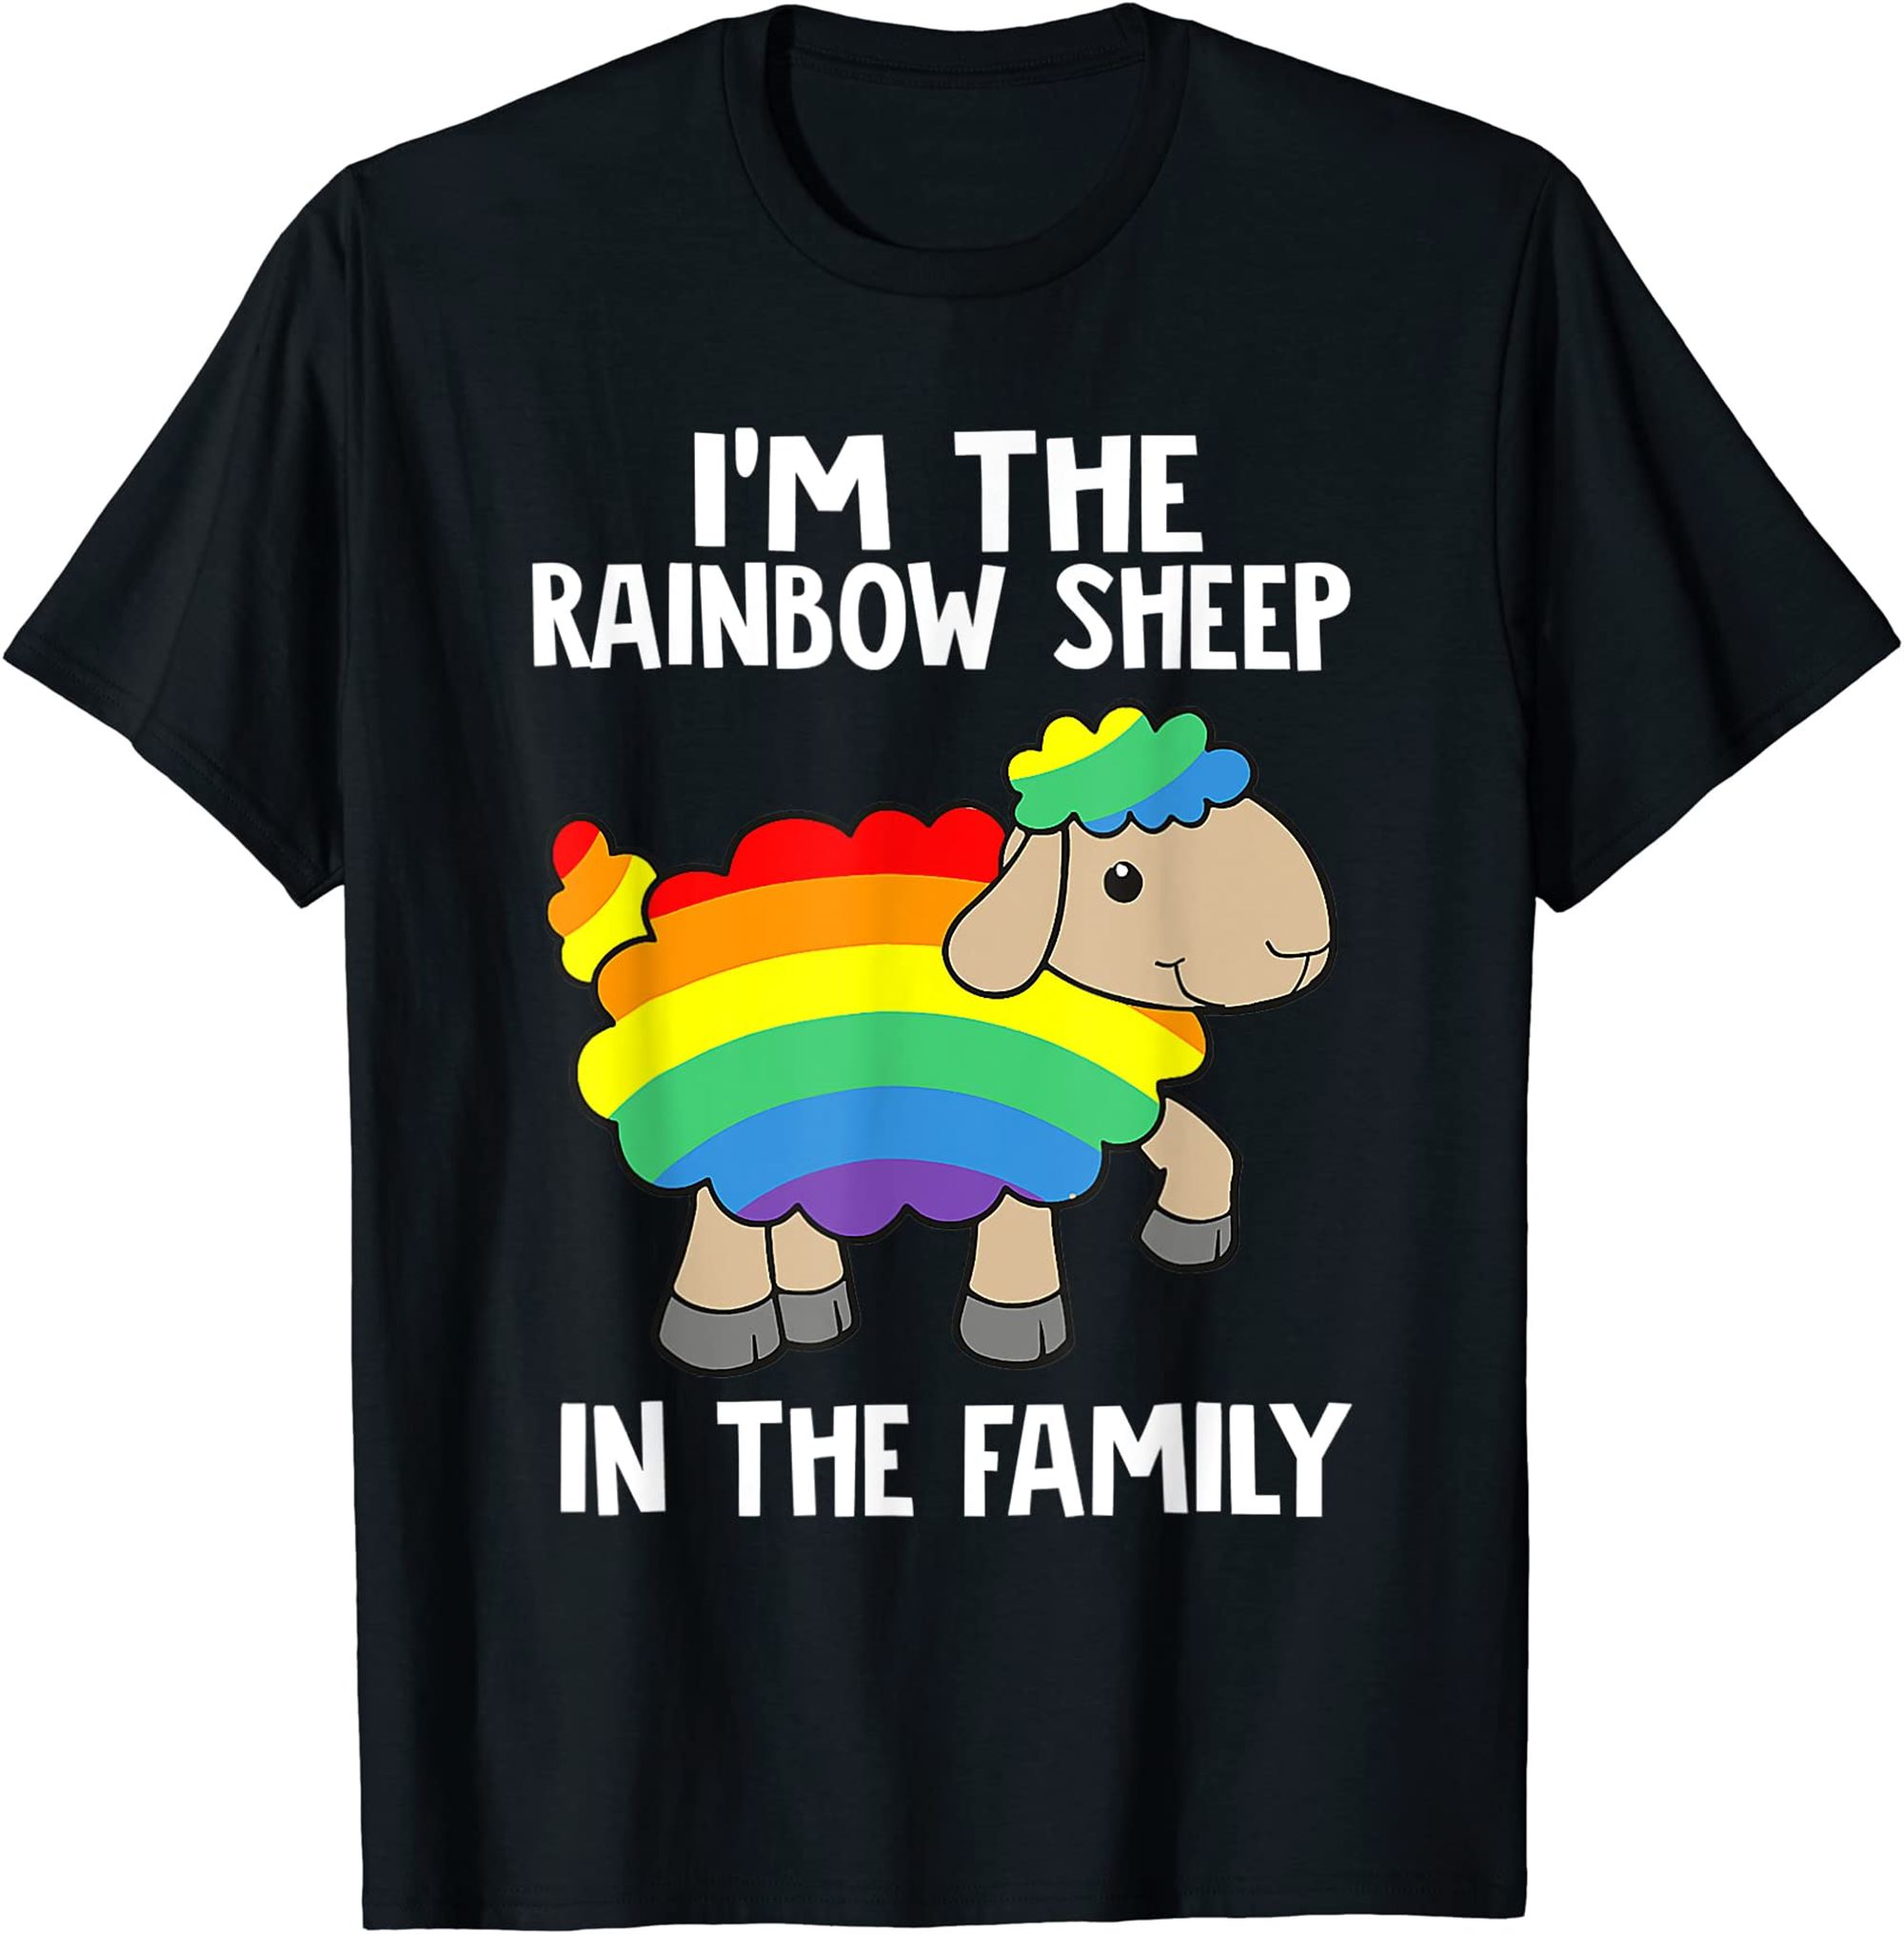 Im The Rainbow Sheep In The Family Lgbtq Pride T-shirt Full Size Up To 5xl